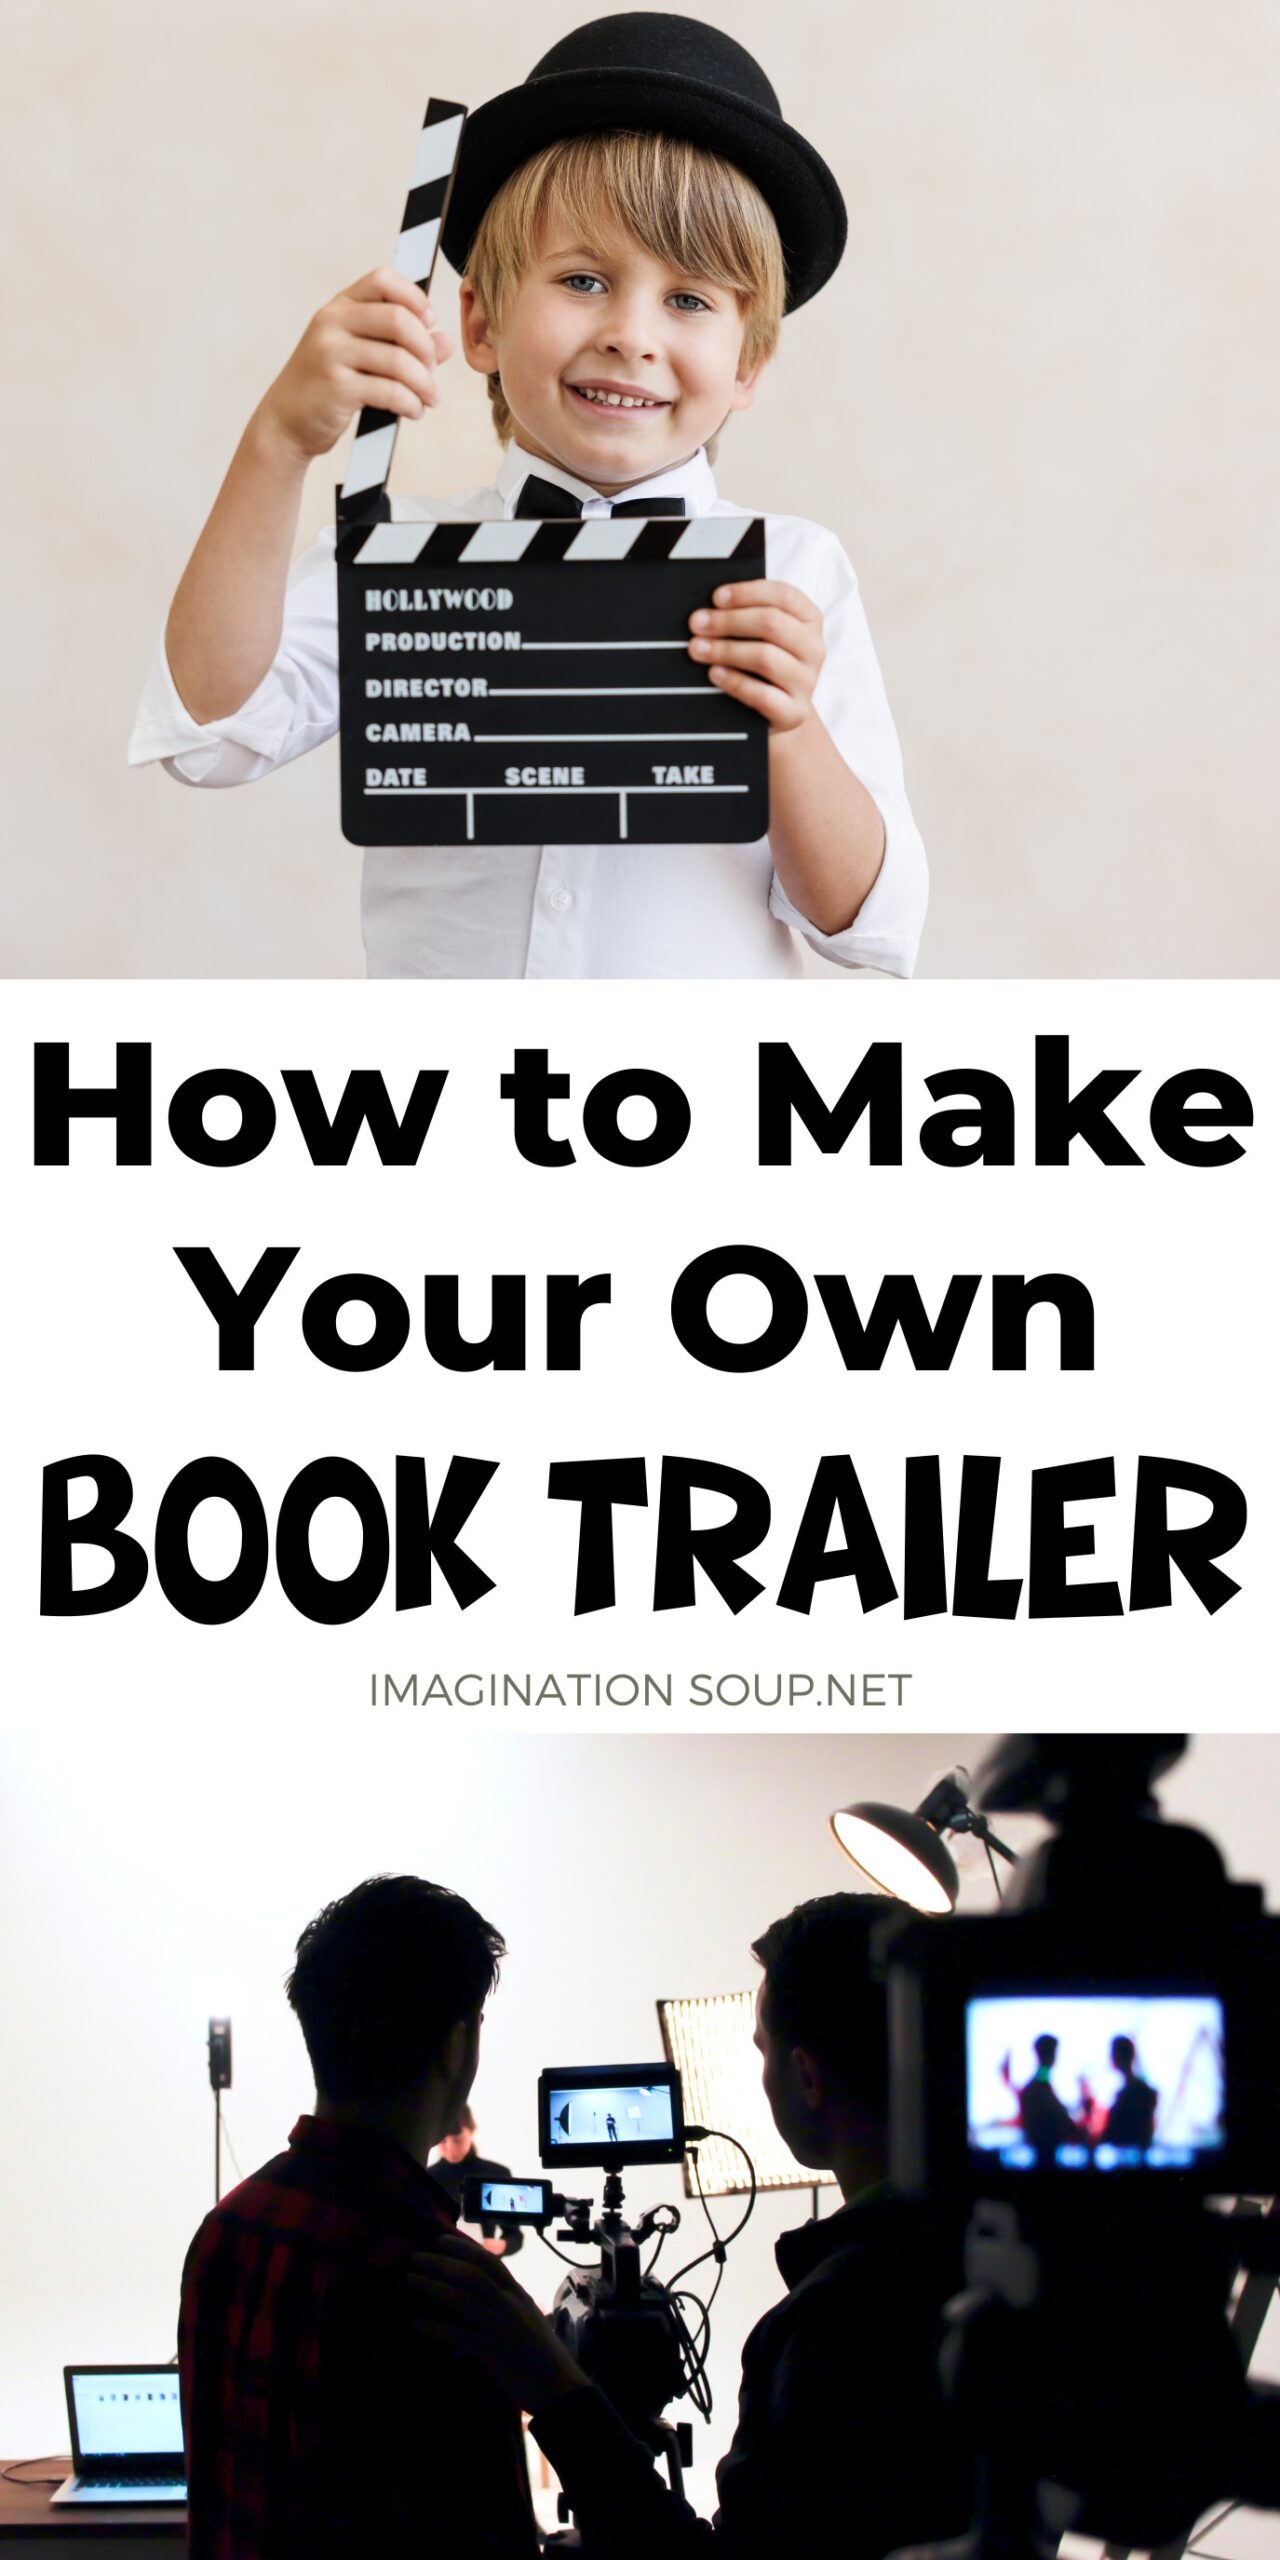 Whether you're a kid at home trying to spice up a book report or a teacher at school trying to do the same thing, making a book trailer is a fun way to incorporate reading with technology and scriptwriting in response to reading. Learn the steps and programs for how to make your own book trailer!